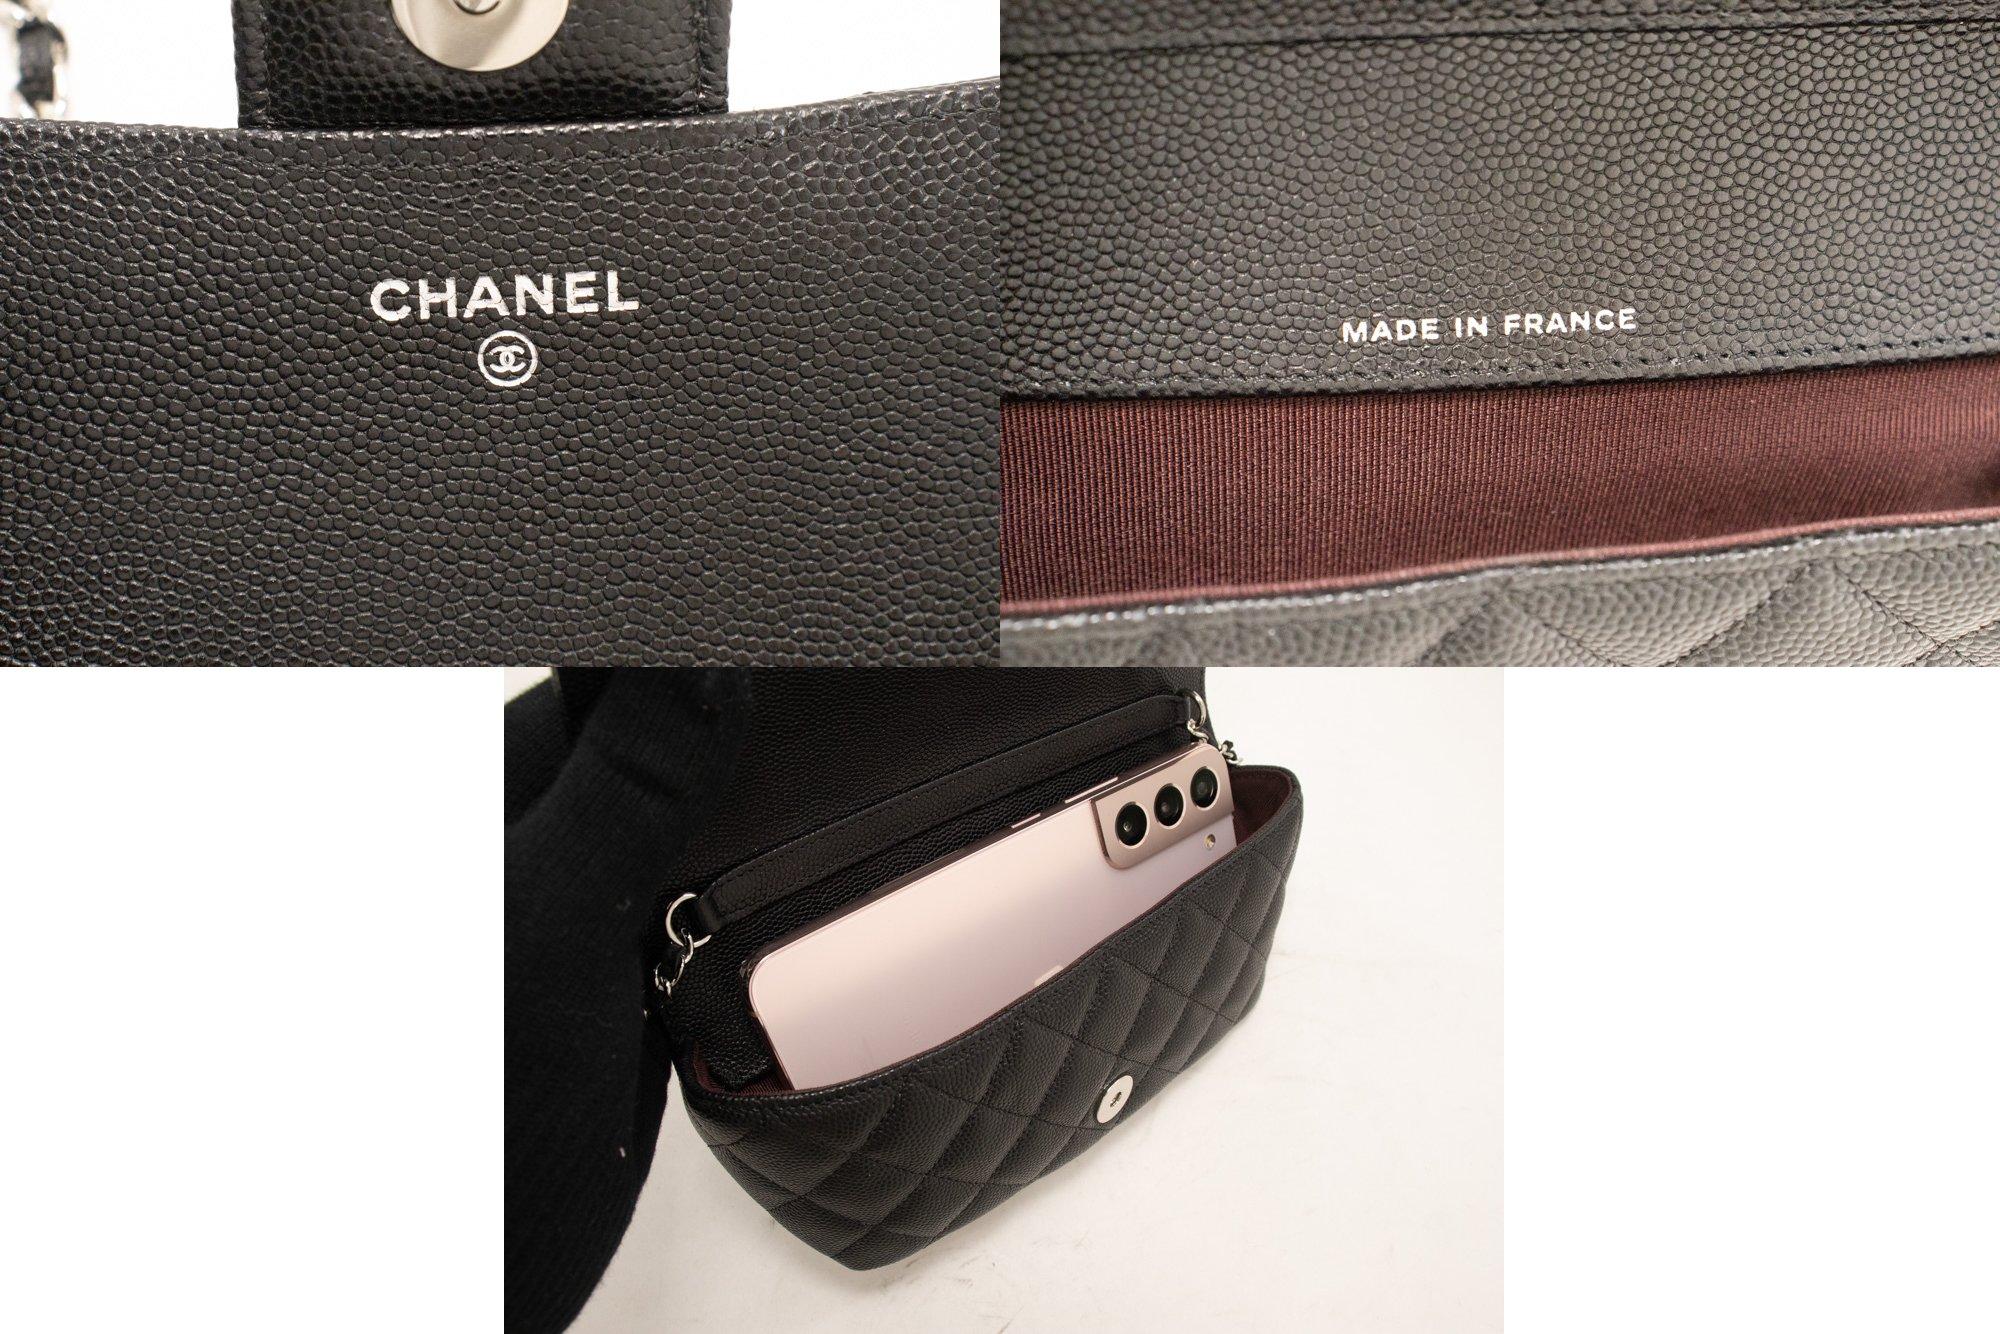 CHANEL Flap Phone Holder With Chain Bag Black Crossbody Clutch For Sale 4